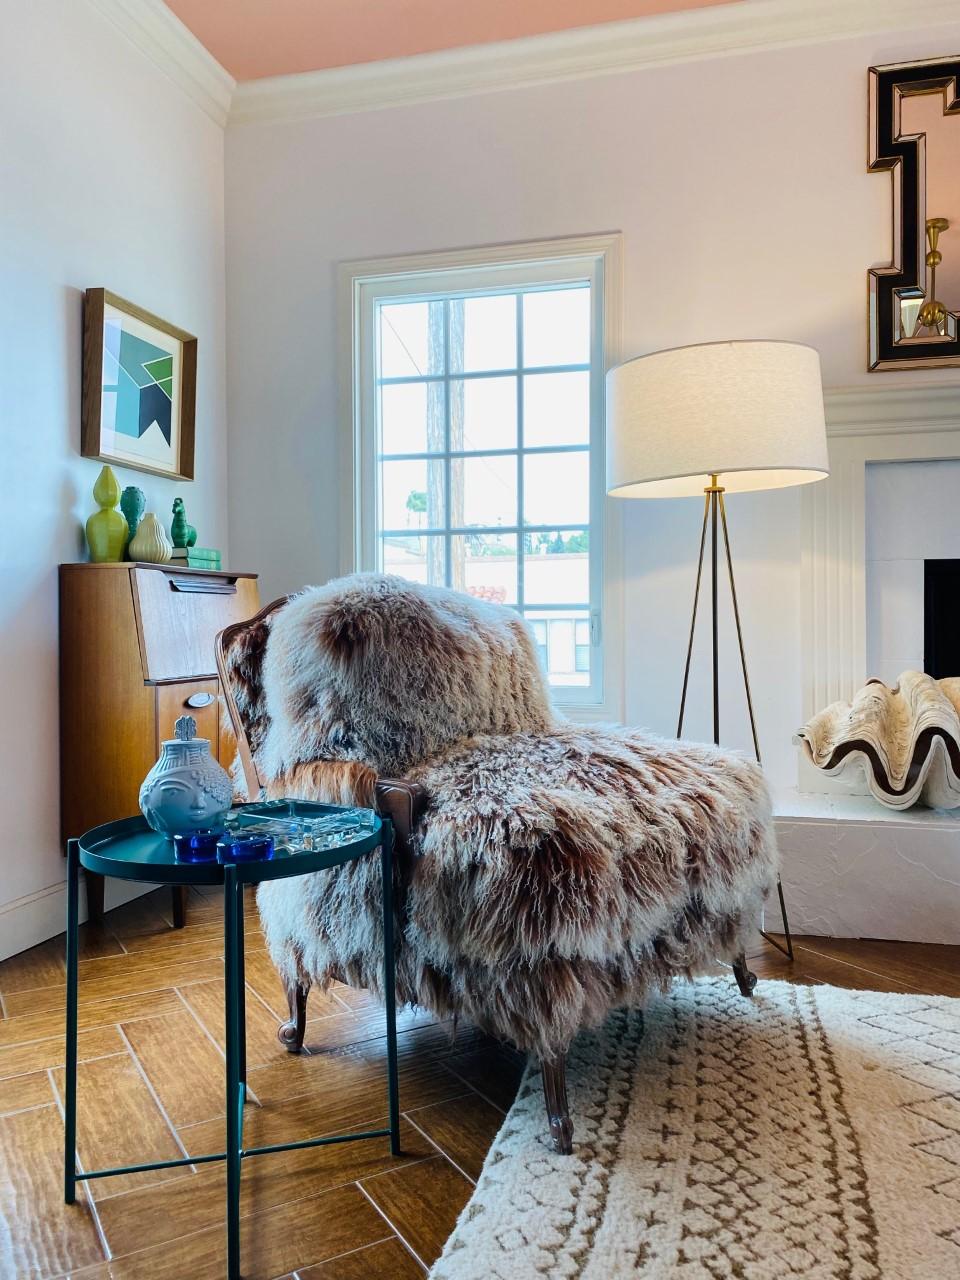 This one of a kind piece is a delicious fusion of form and function. The Auberge style frame in a weathered wood finish establishes a rustic-chic style. The shaggy mongolian sheep fur in neutral creams and reddish browns adds volume and lightness to